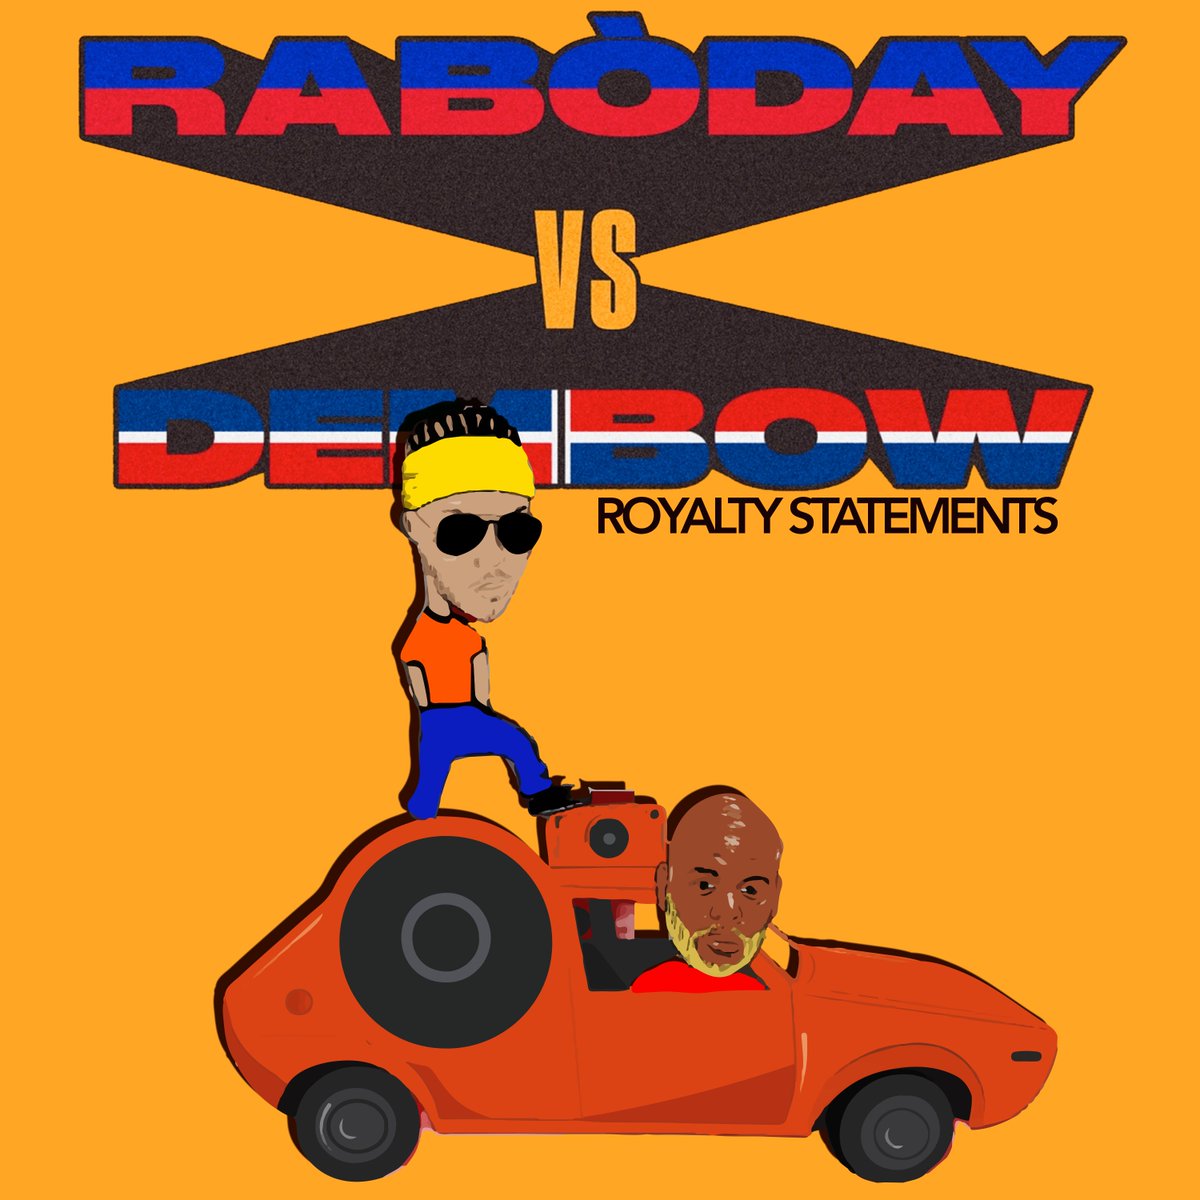 Royalty Statements unite the sounds of Haiti + the Dominican Republic on new 'Raboday vs Dembow' Mix 🇭🇹 🇩🇴 largeup.com/2023/01/27/roy…